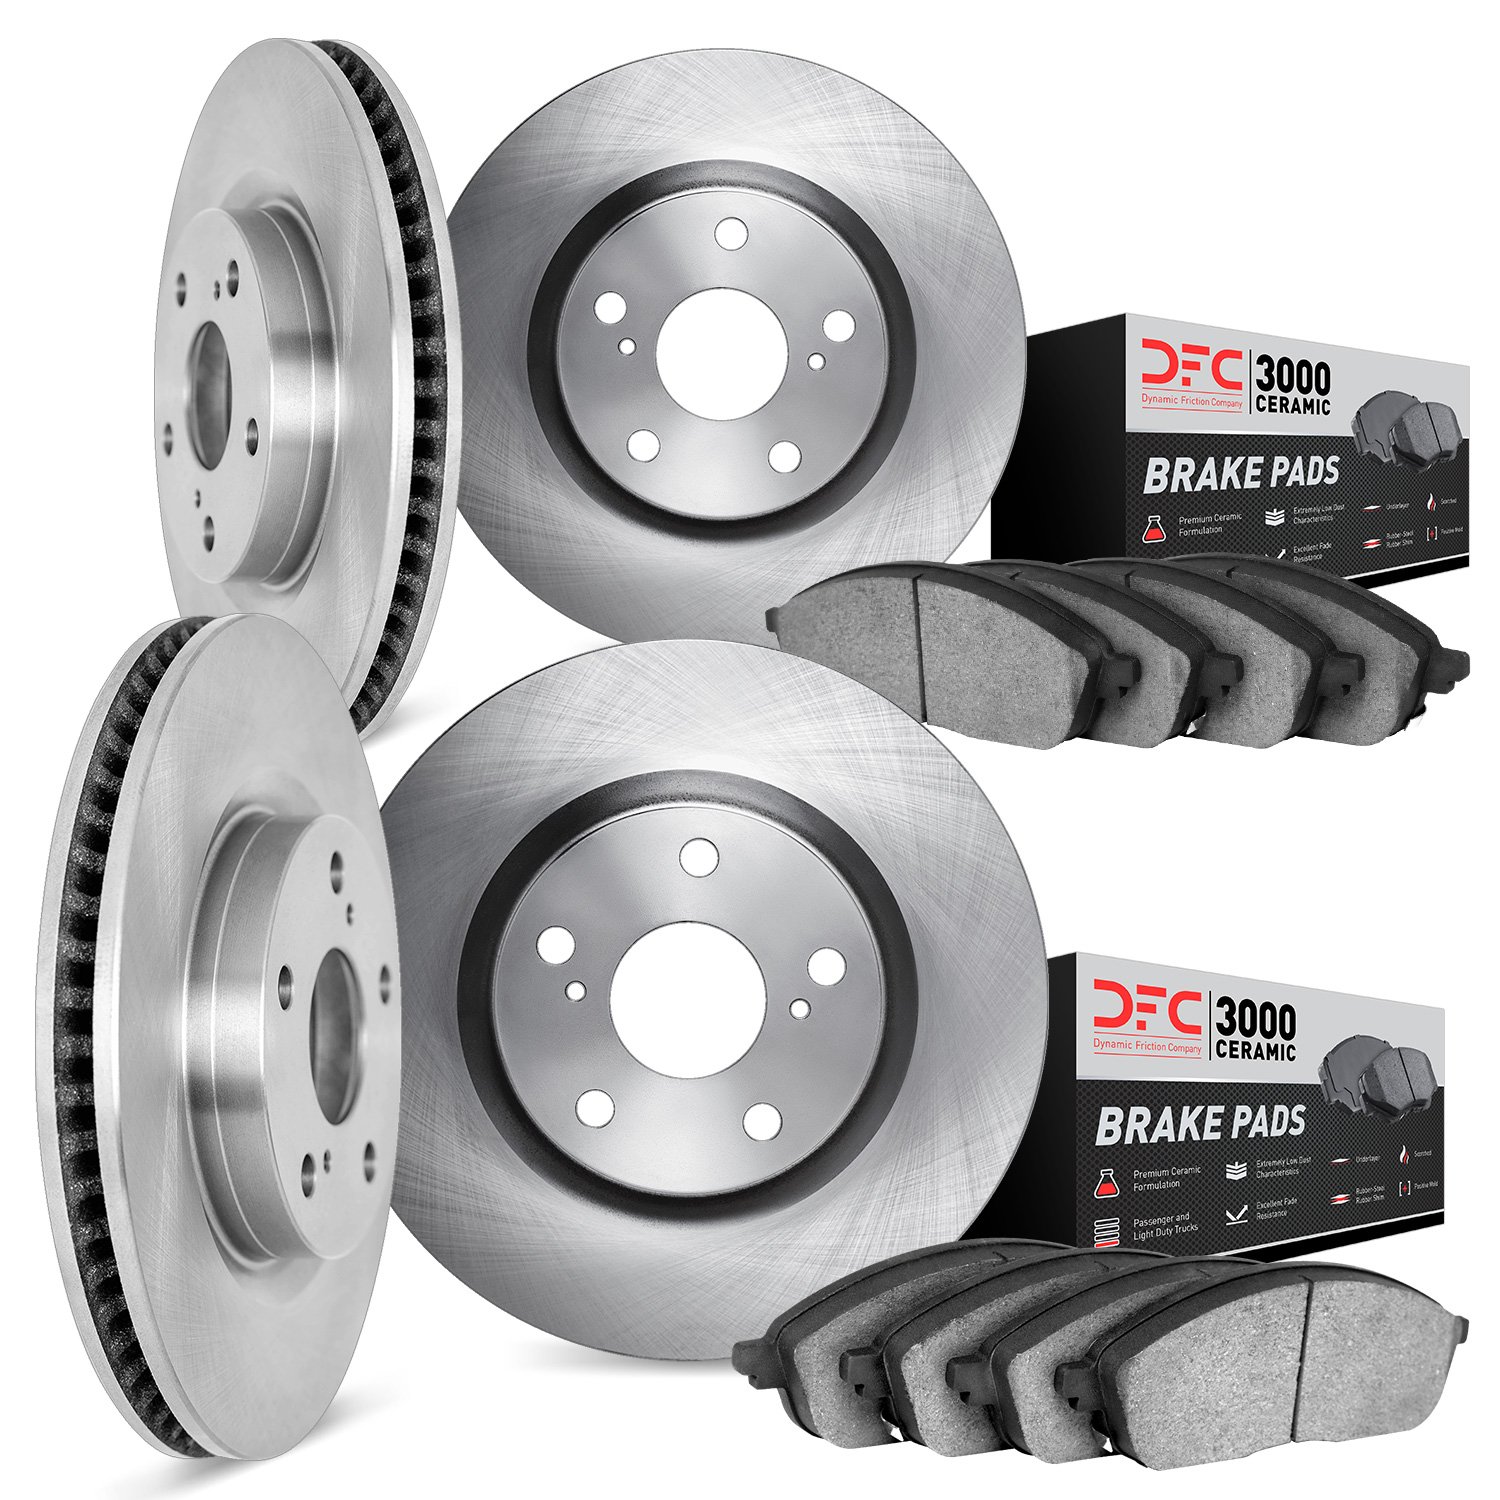 6304-31090 Brake Rotors with 3000-Series Ceramic Brake Pads Kit, 2013-2018 BMW, Position: Front and Rear